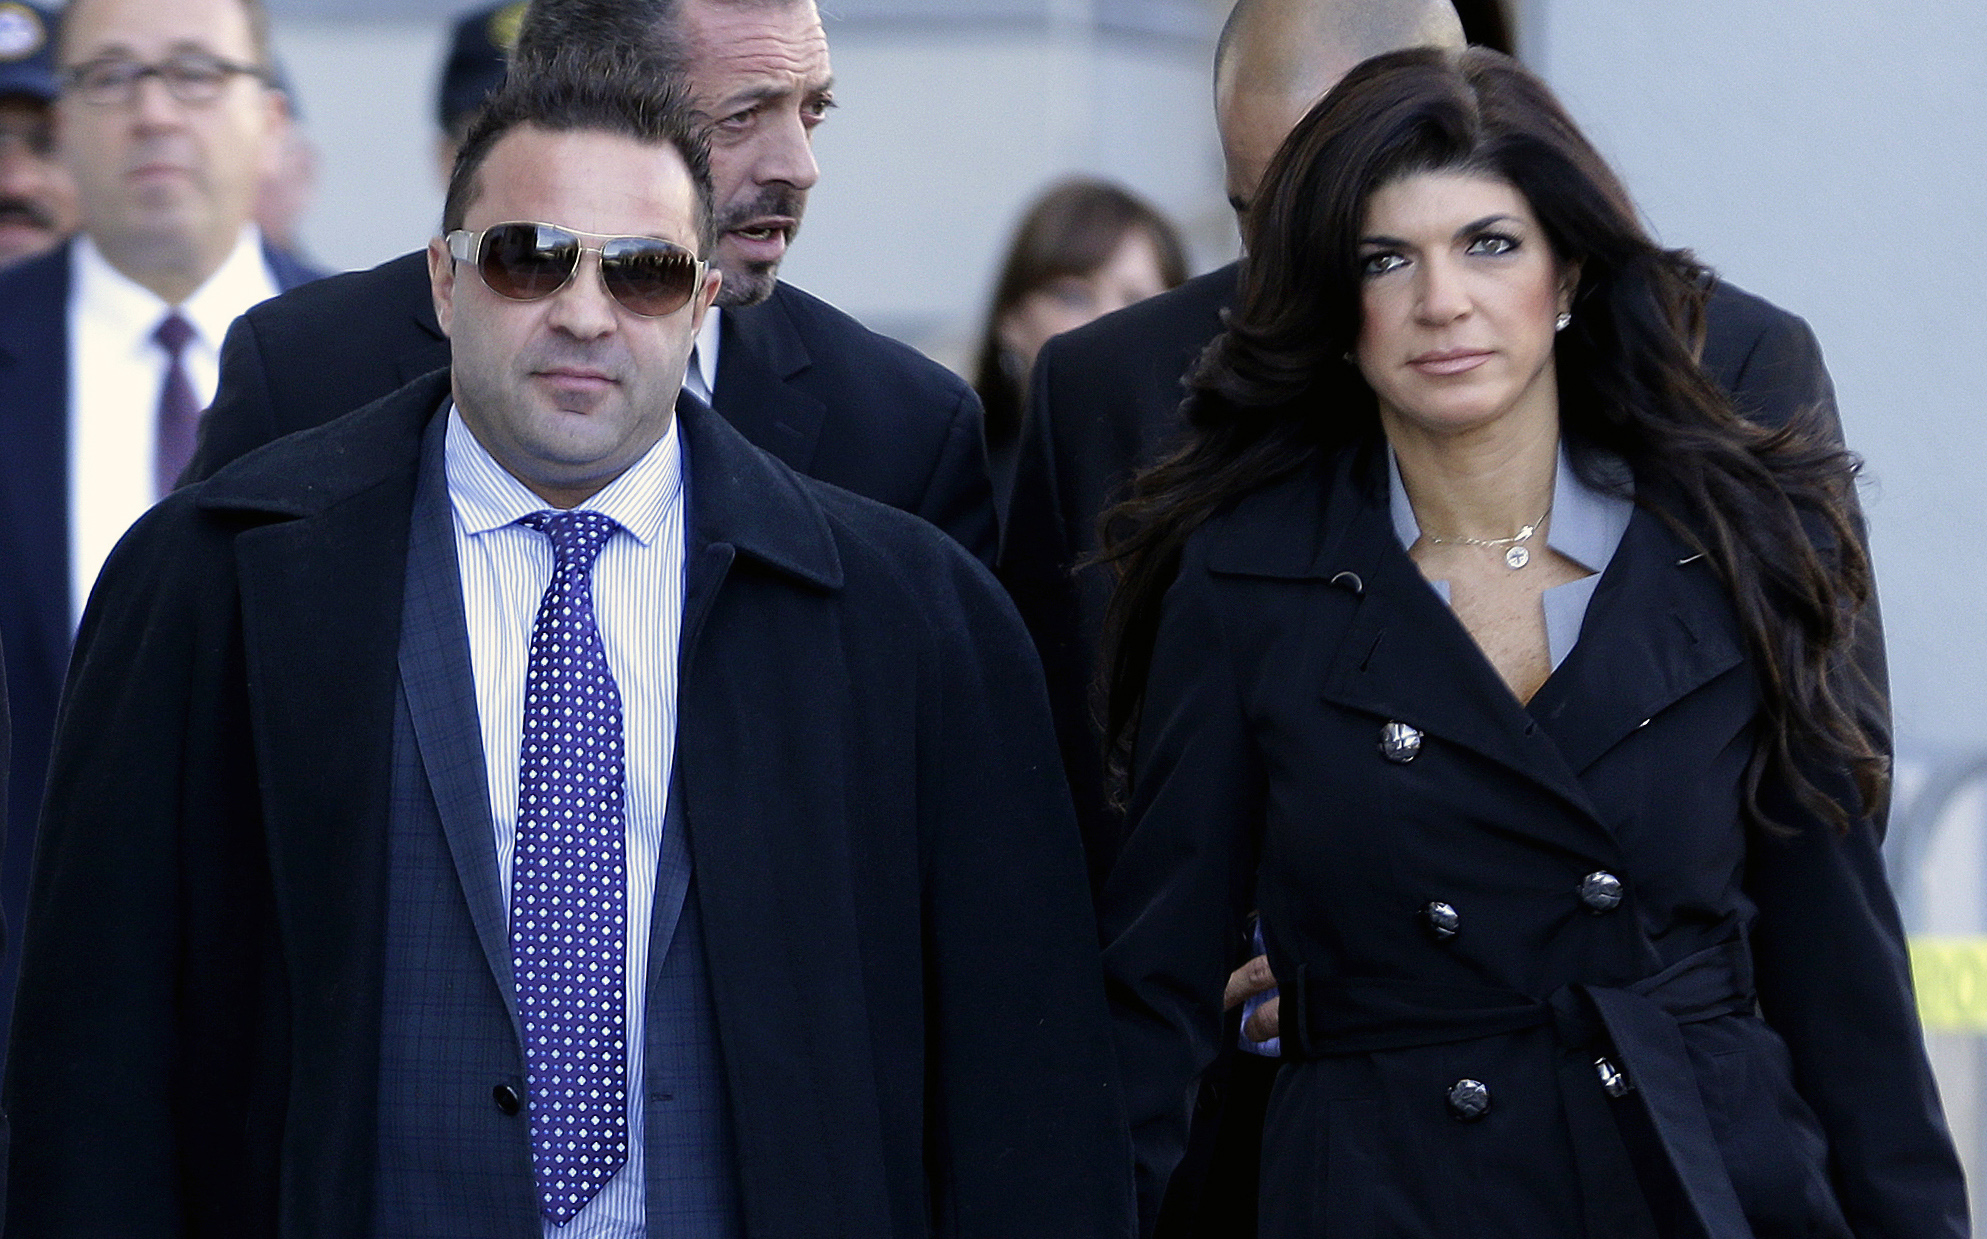 PHOTO: In this Nov. 20, 2013, file photo, Giuseppe "Joe" Giudice, left, and his wife, Teresa Giudice, of Montville Township, N.J., walk out of Martin Luther King Jr. Courthouse after a court appearance, in Newark, N.J.